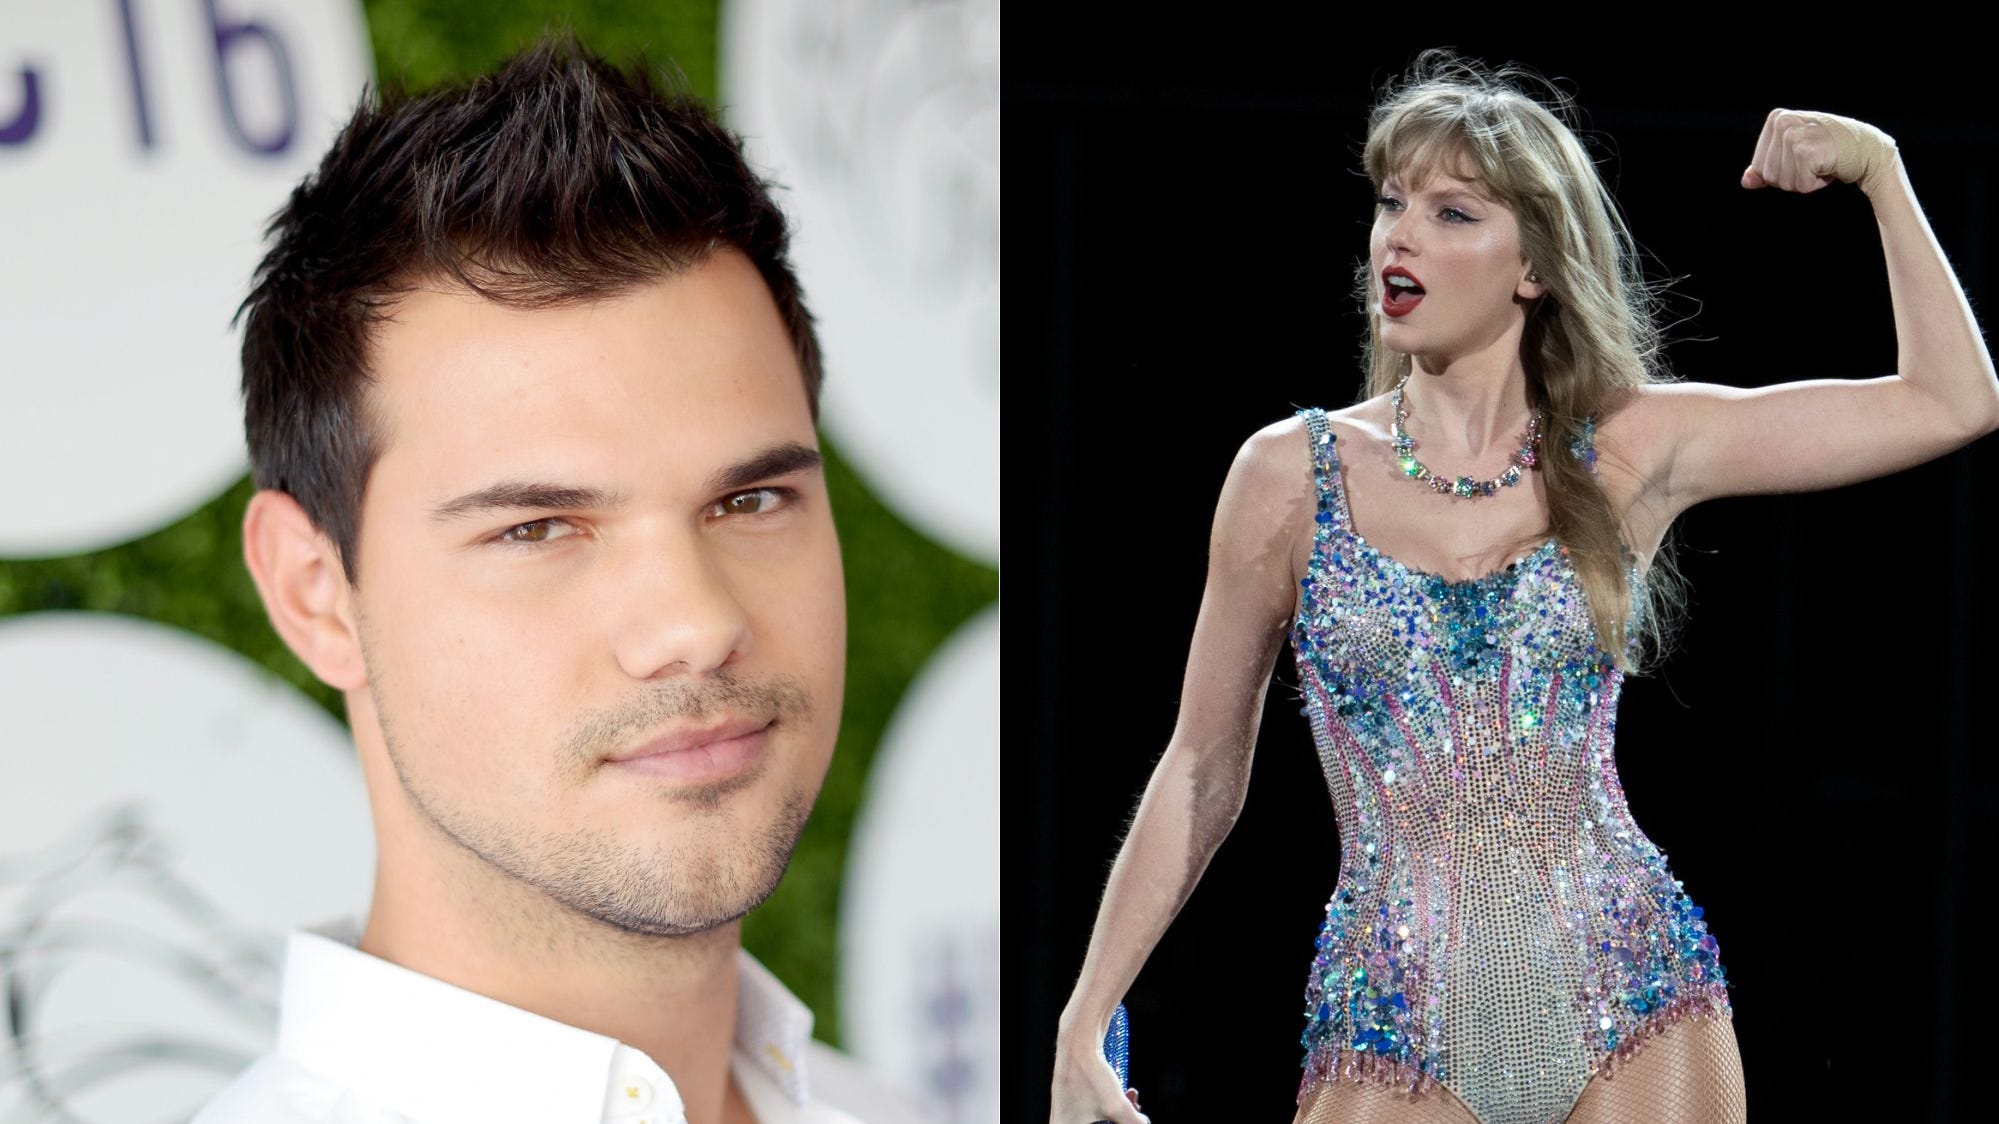 Taylor Lautner says he feels 'safe' with revisit of Taylor Swift relationship on rerecorded album